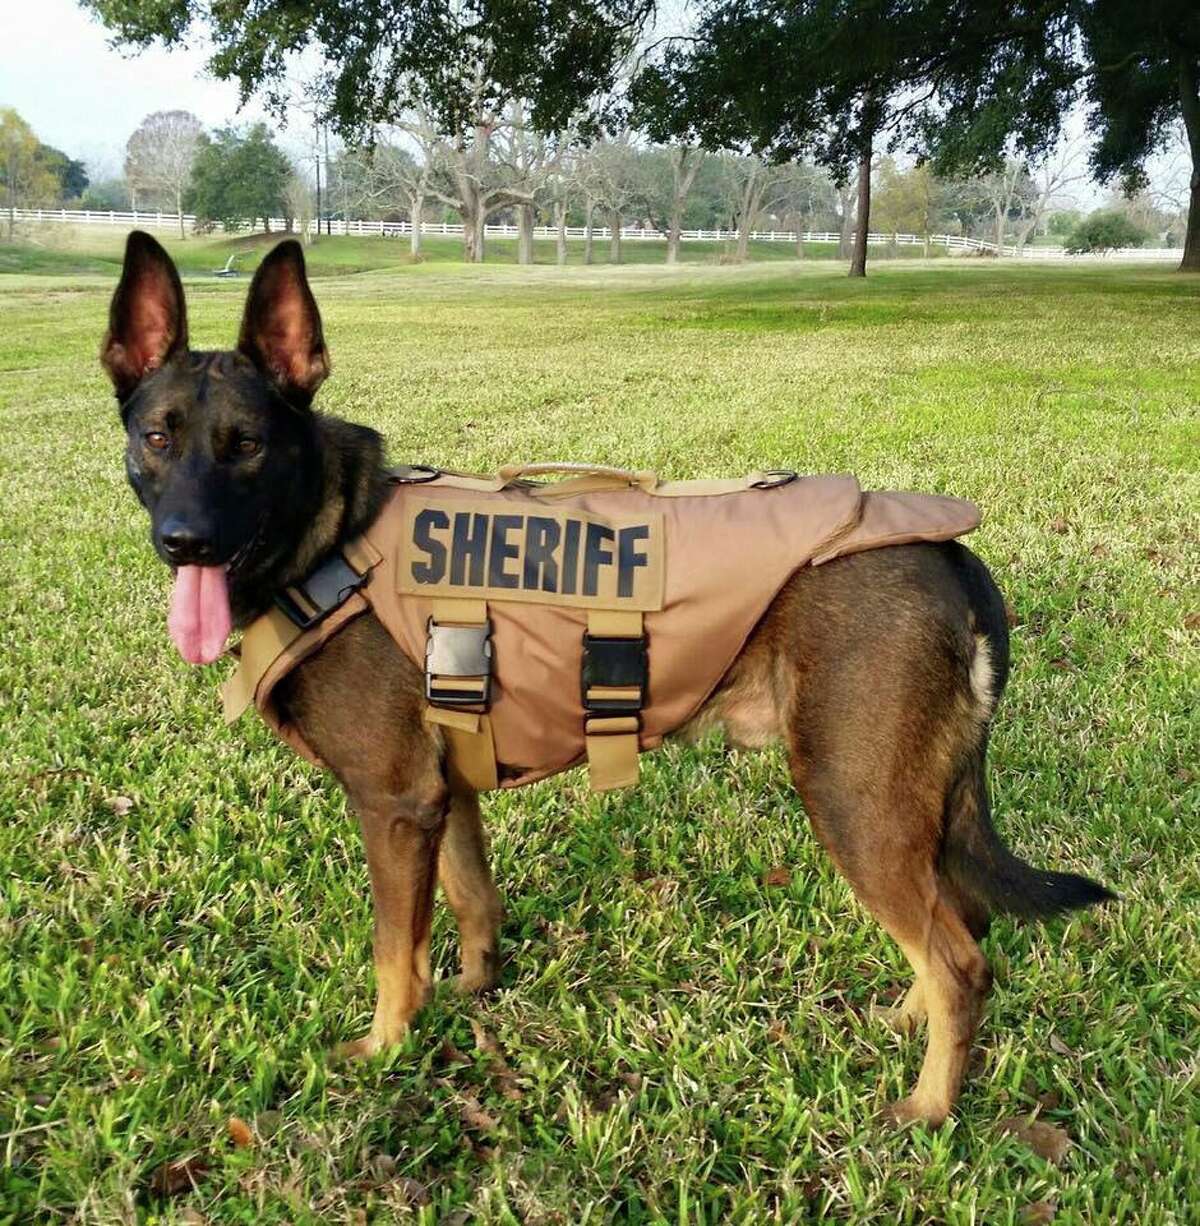 Venomous animals K9 Rudy, the Fort Bend County Sheriff's Office police dog, was recently bit by a venomous snake but is expected to make a full recovery. Click through to see the most venomous snakes, spiders and bugs in Texas.